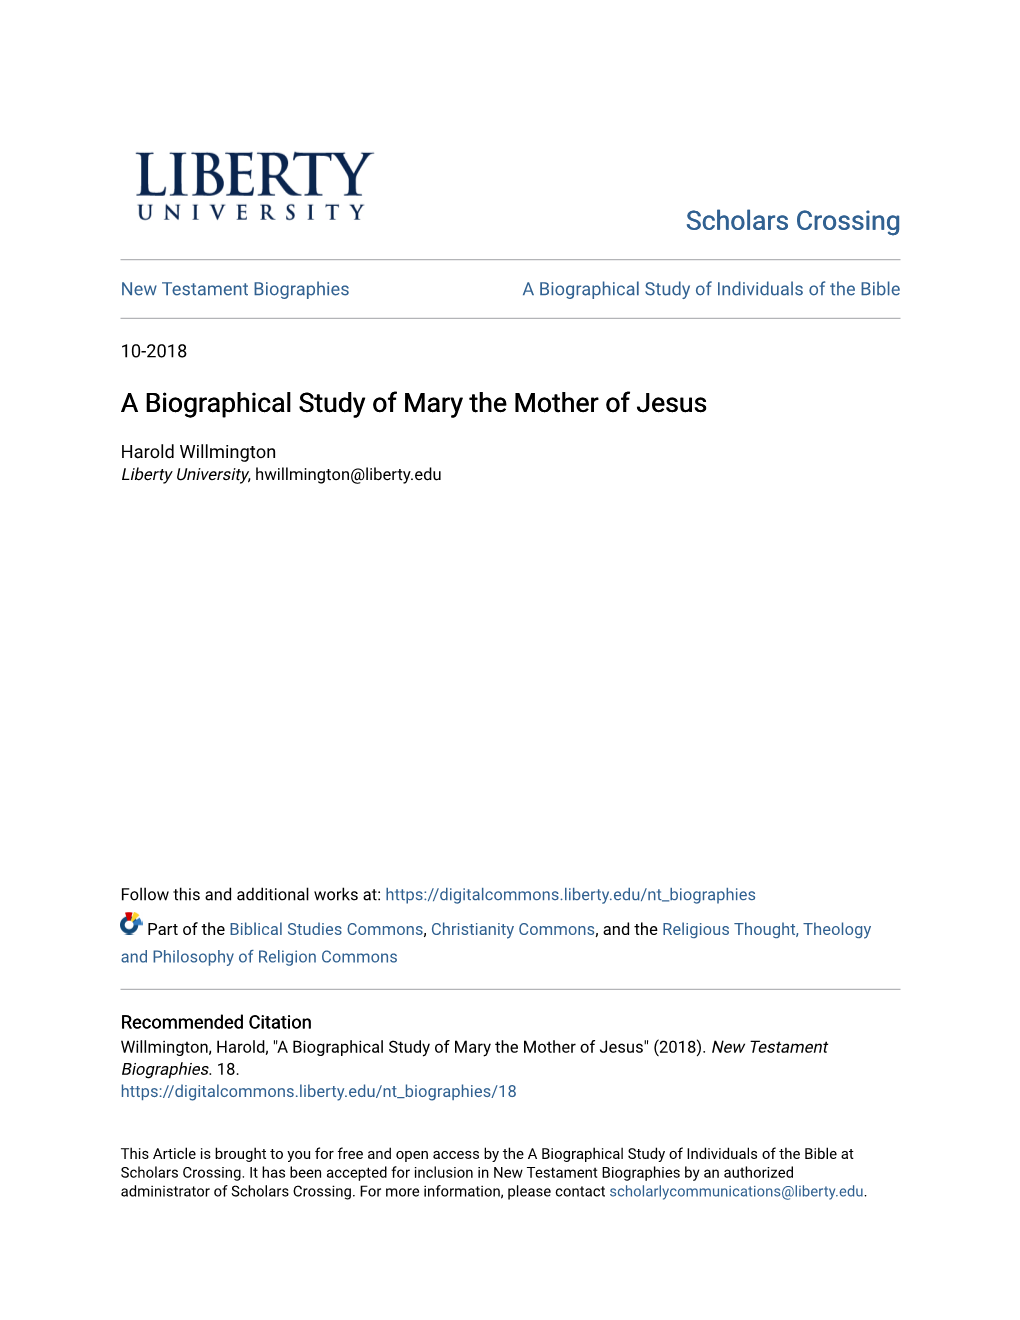 A Biographical Study of Mary the Mother of Jesus